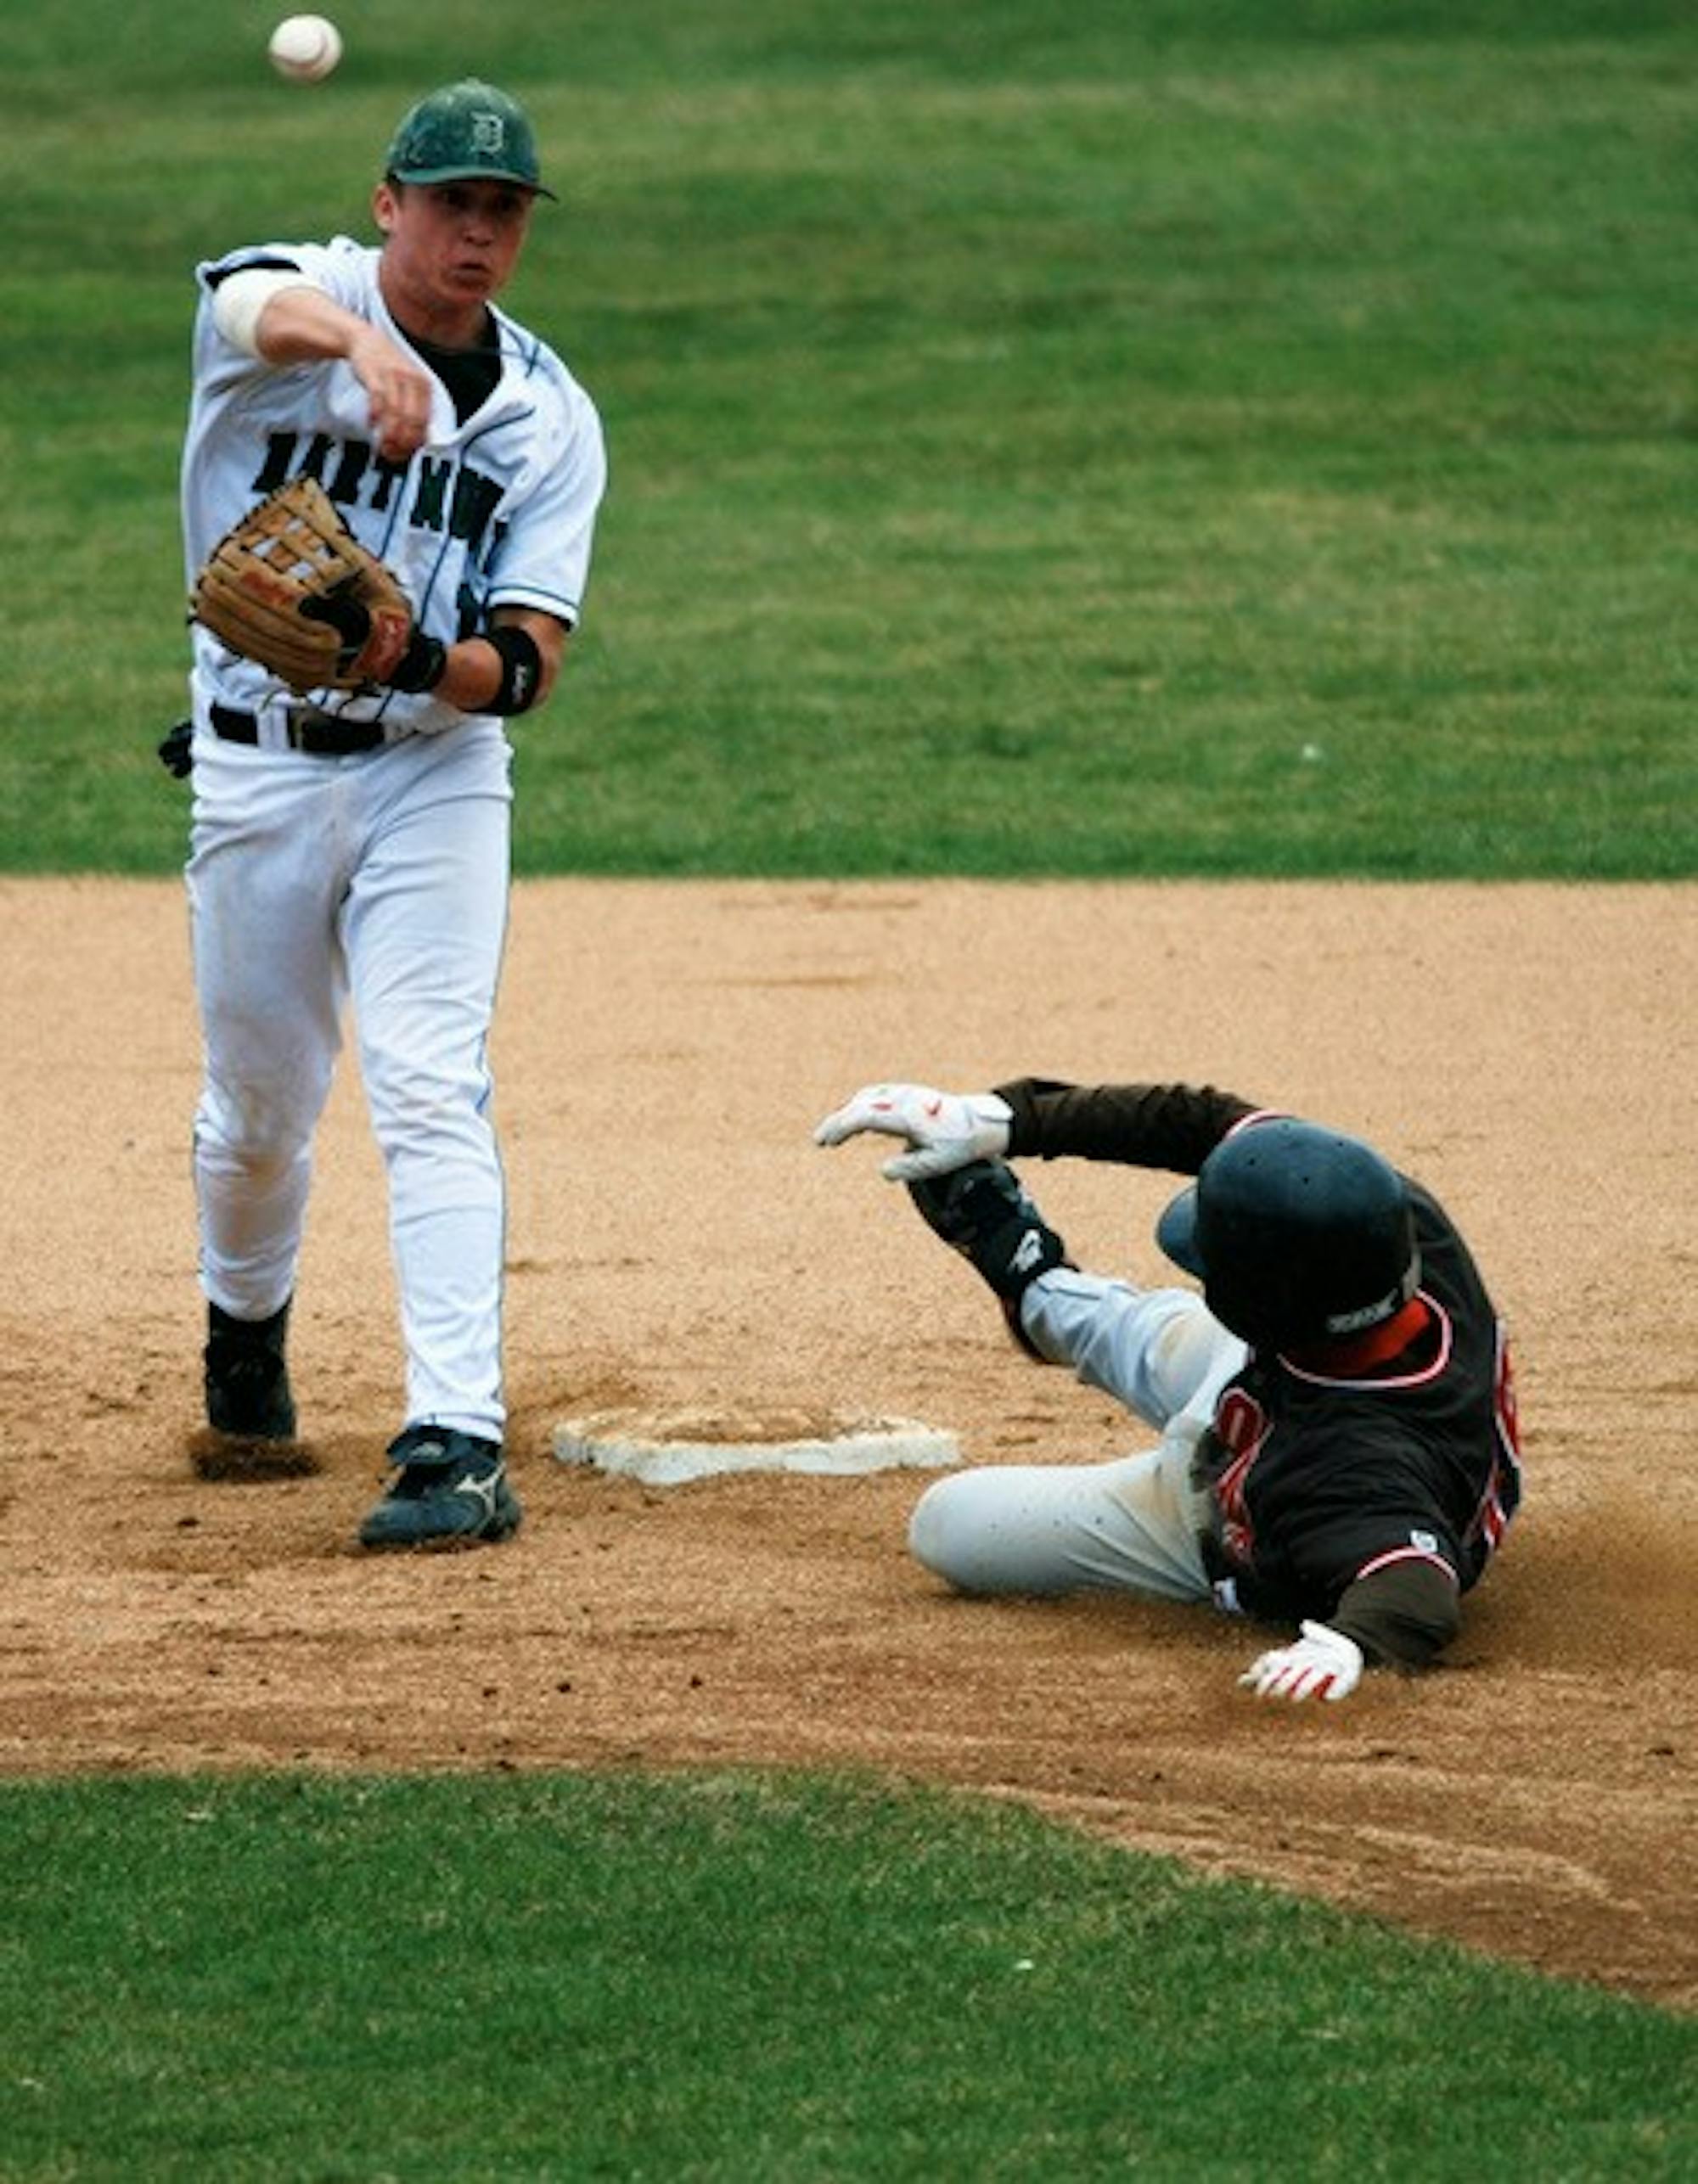 Jason McManis '08 tries to turn a double play against the Bears.